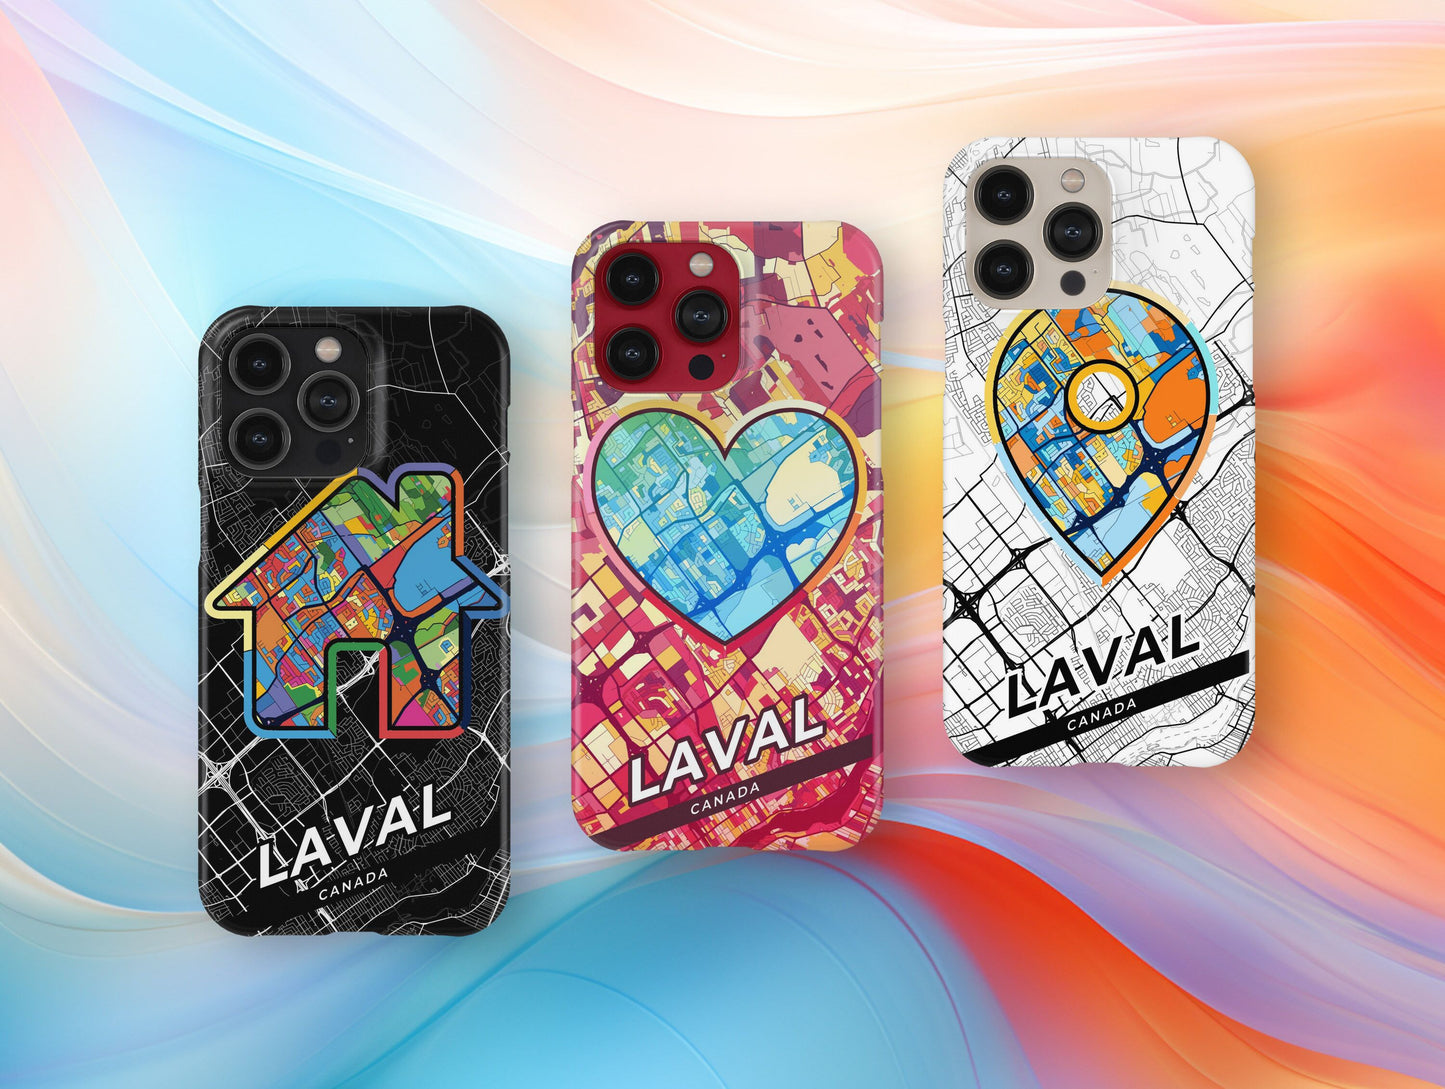 Laval Canada slim phone case with colorful icon. Birthday, wedding or housewarming gift. Couple match cases.